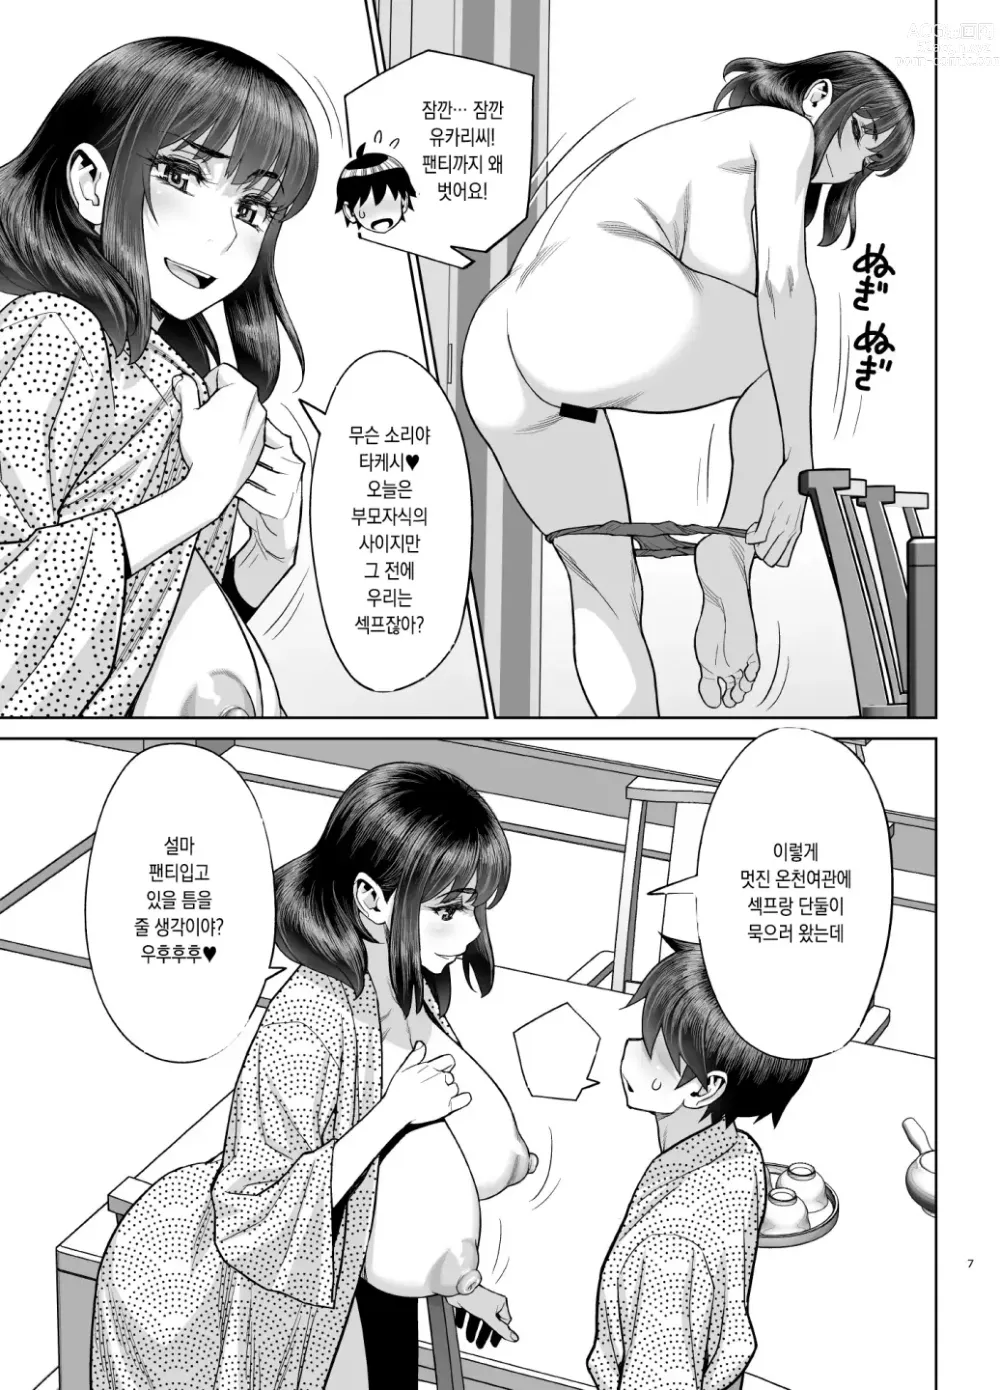 Page 7 of doujinshi 첫숙박 섹스